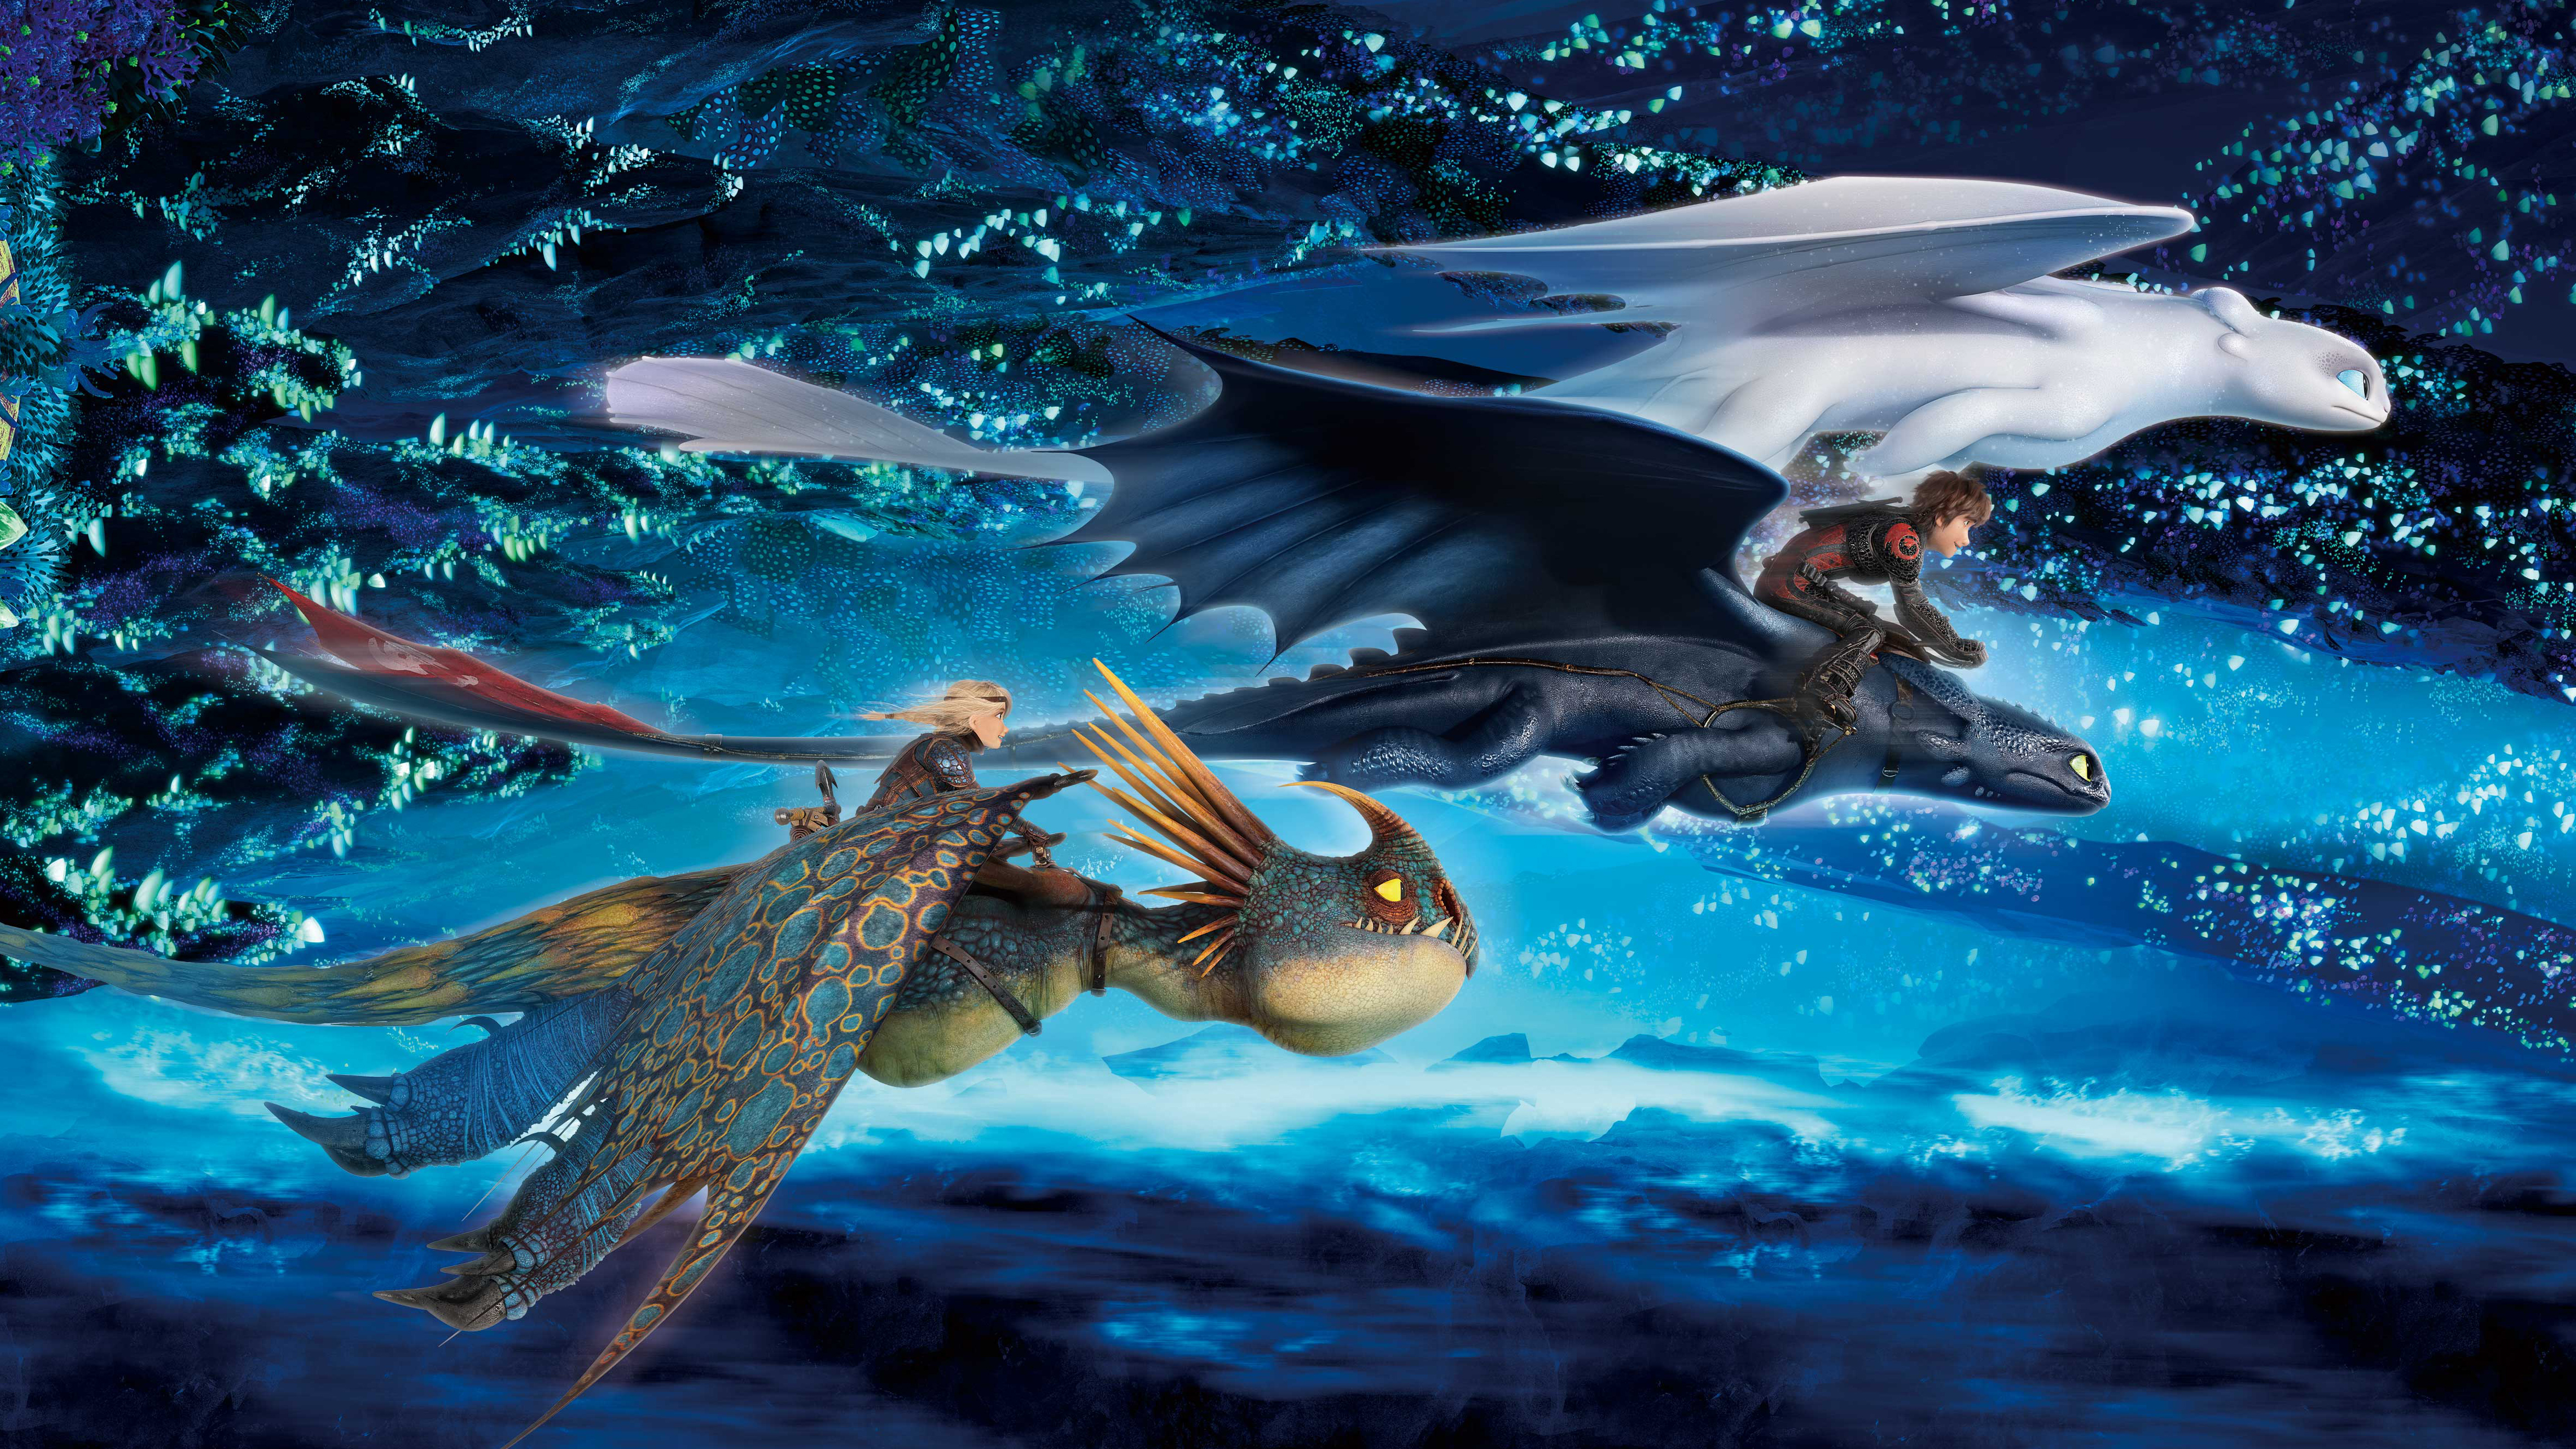 Deadly Nadder How to Train Your Dragon HD Wallpapers and Backgrounds 4702x2645